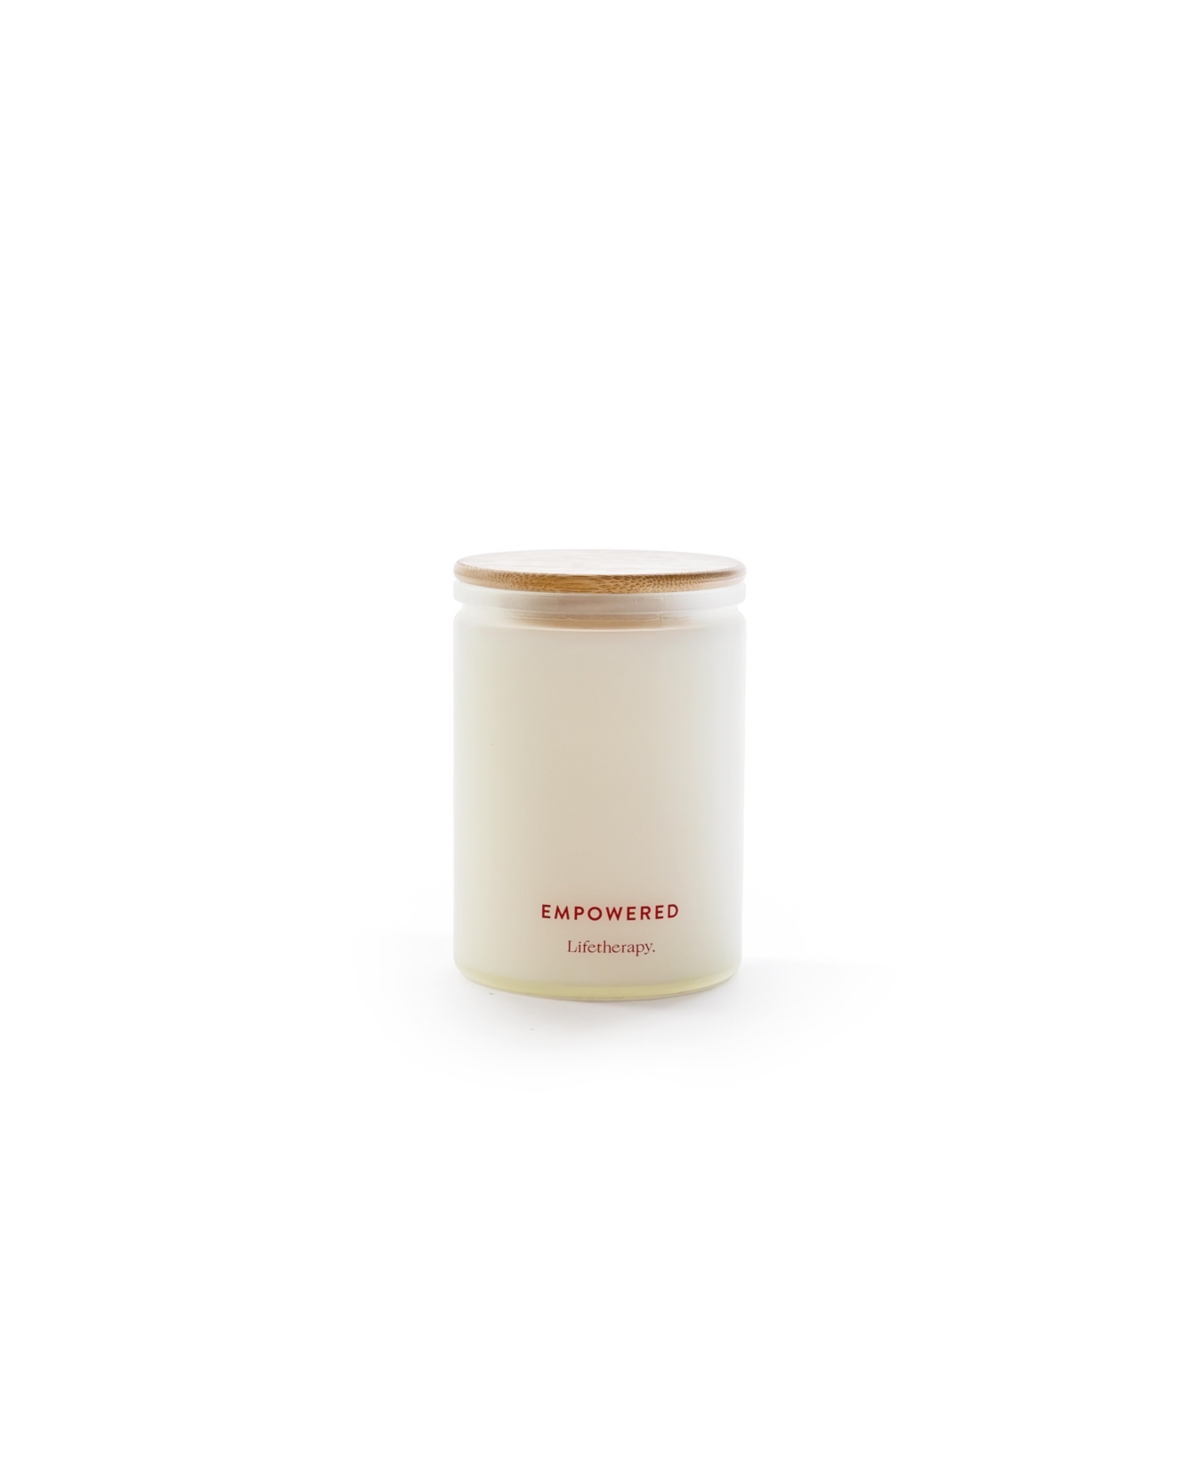 Lifetherapy Empowered 75 Hour Scented Soy Candle